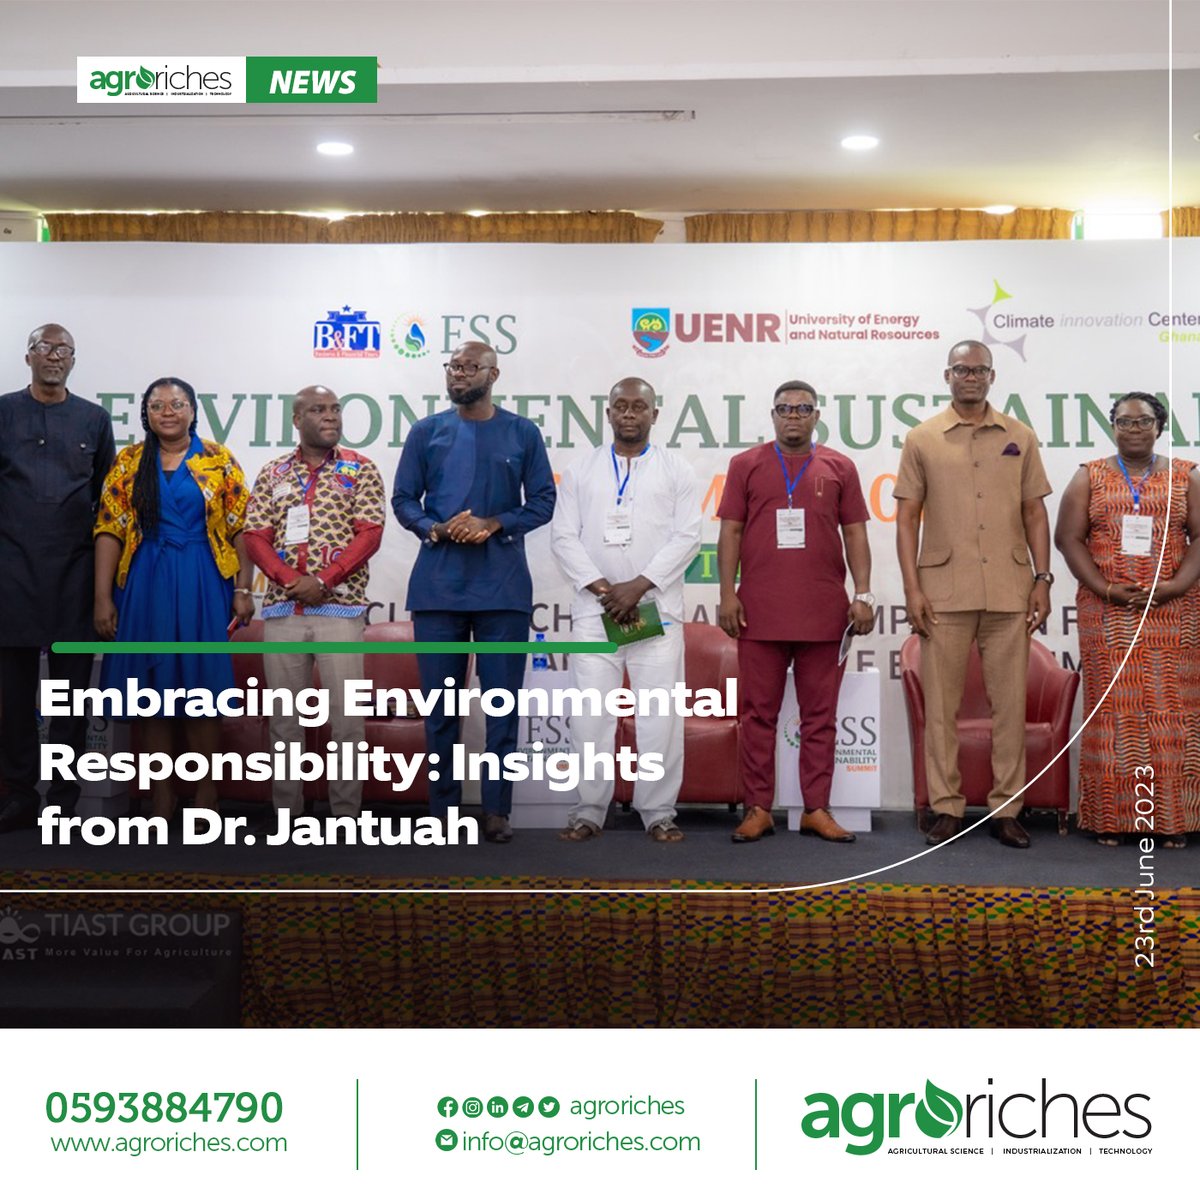 Embracing Environmental Responsibility: Insights from Dr. Jantuah

agroriches.com/embracing-envi…

#future #project #agroriches #farm #agricuture #crop #world #agriculturenews #news #quality #farmers #news #environmental